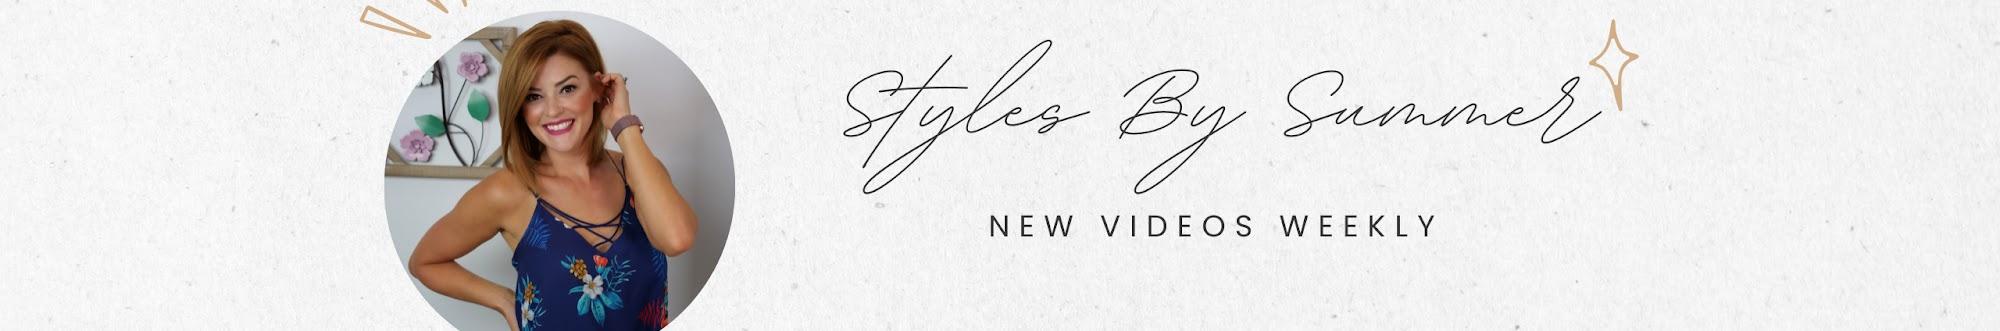 Styles By Summer